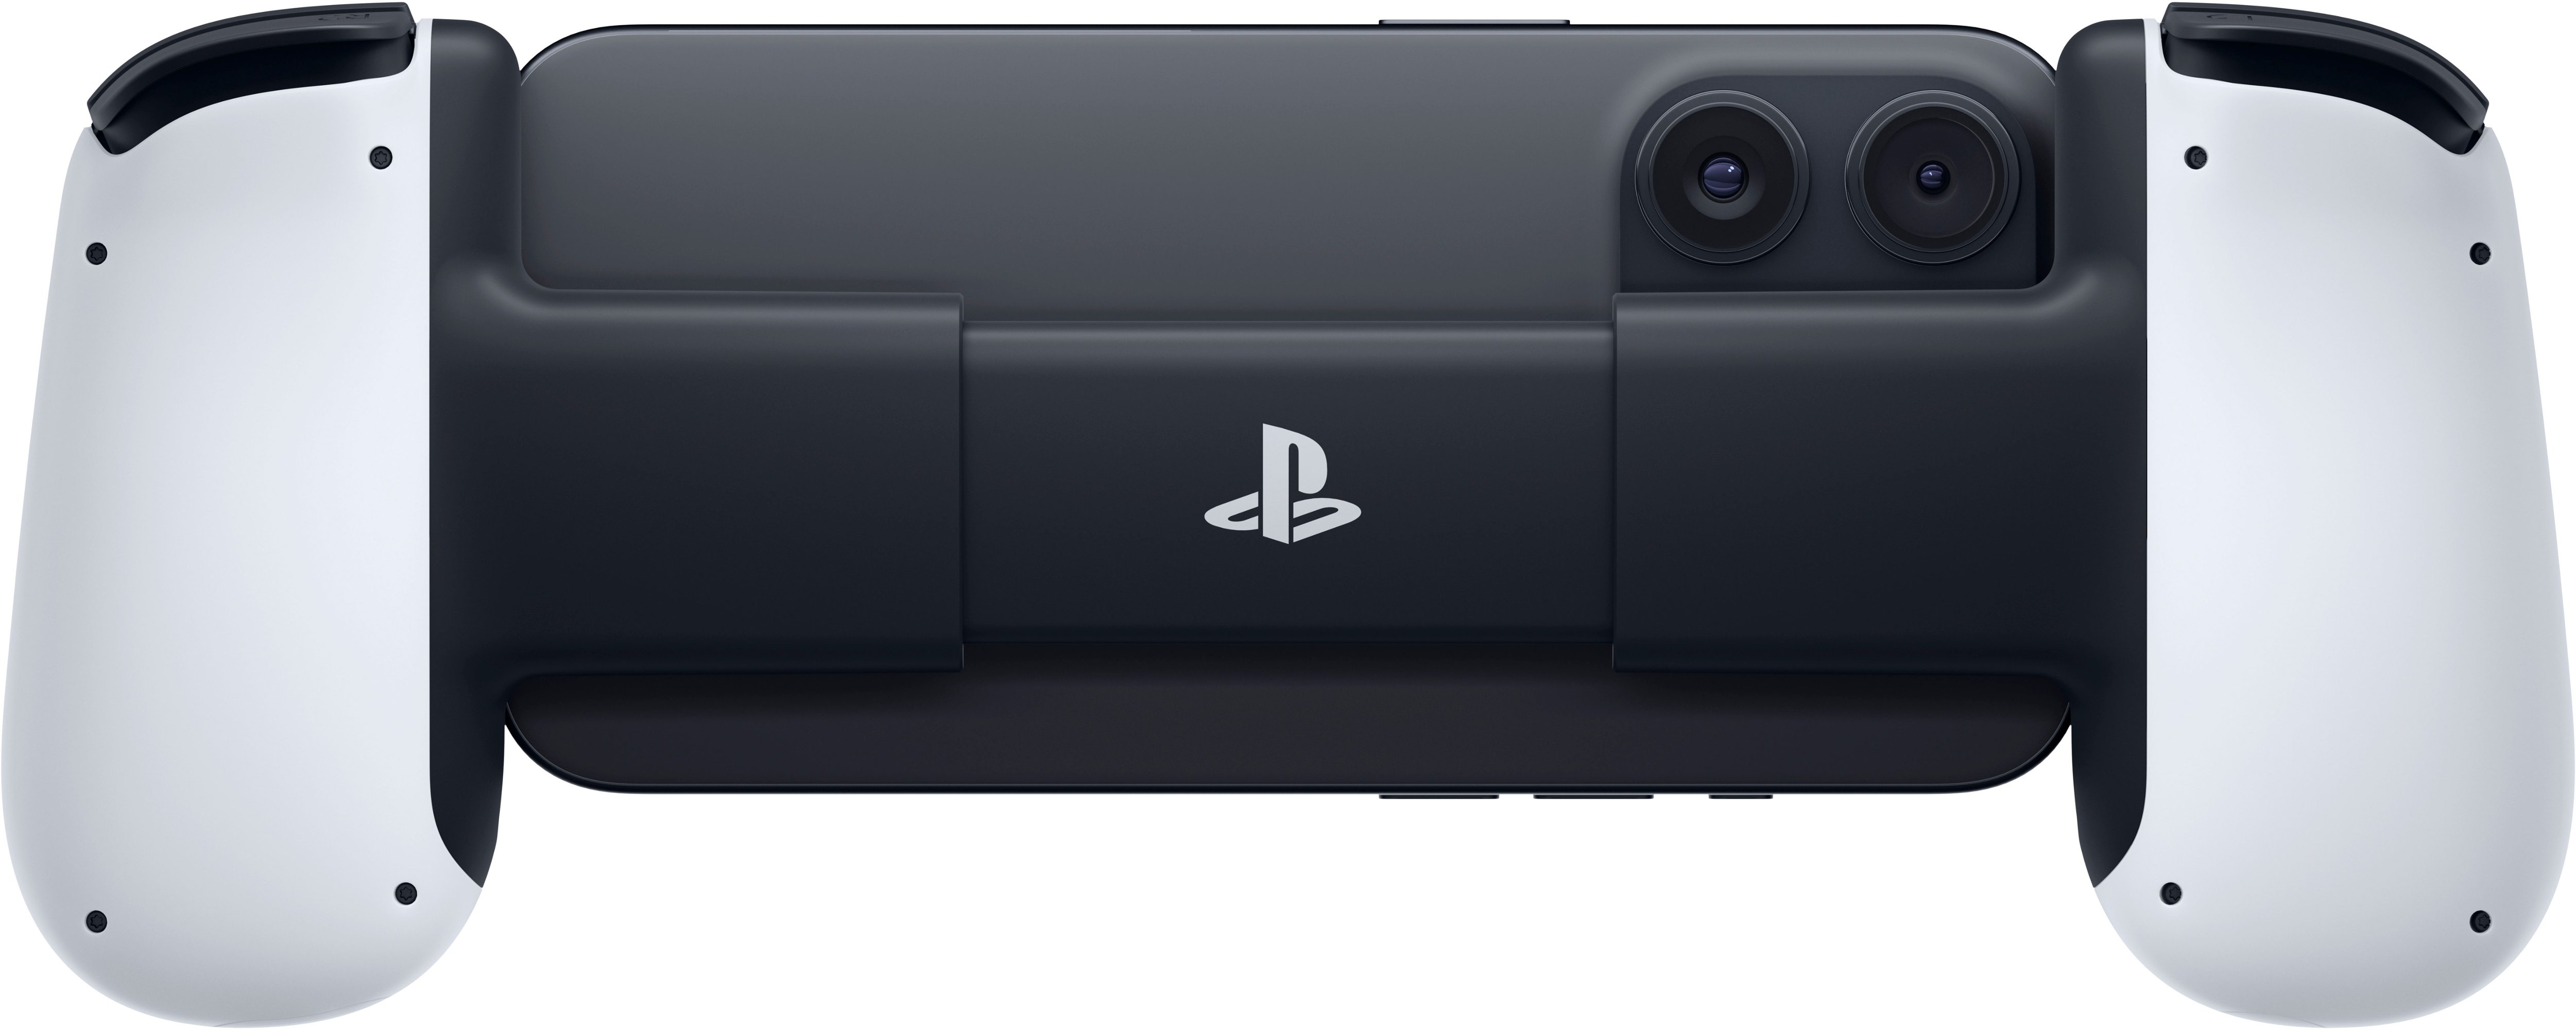 PS5, PS4 Finally Go Portable with Officially Licensed PlayStation Backbone  One